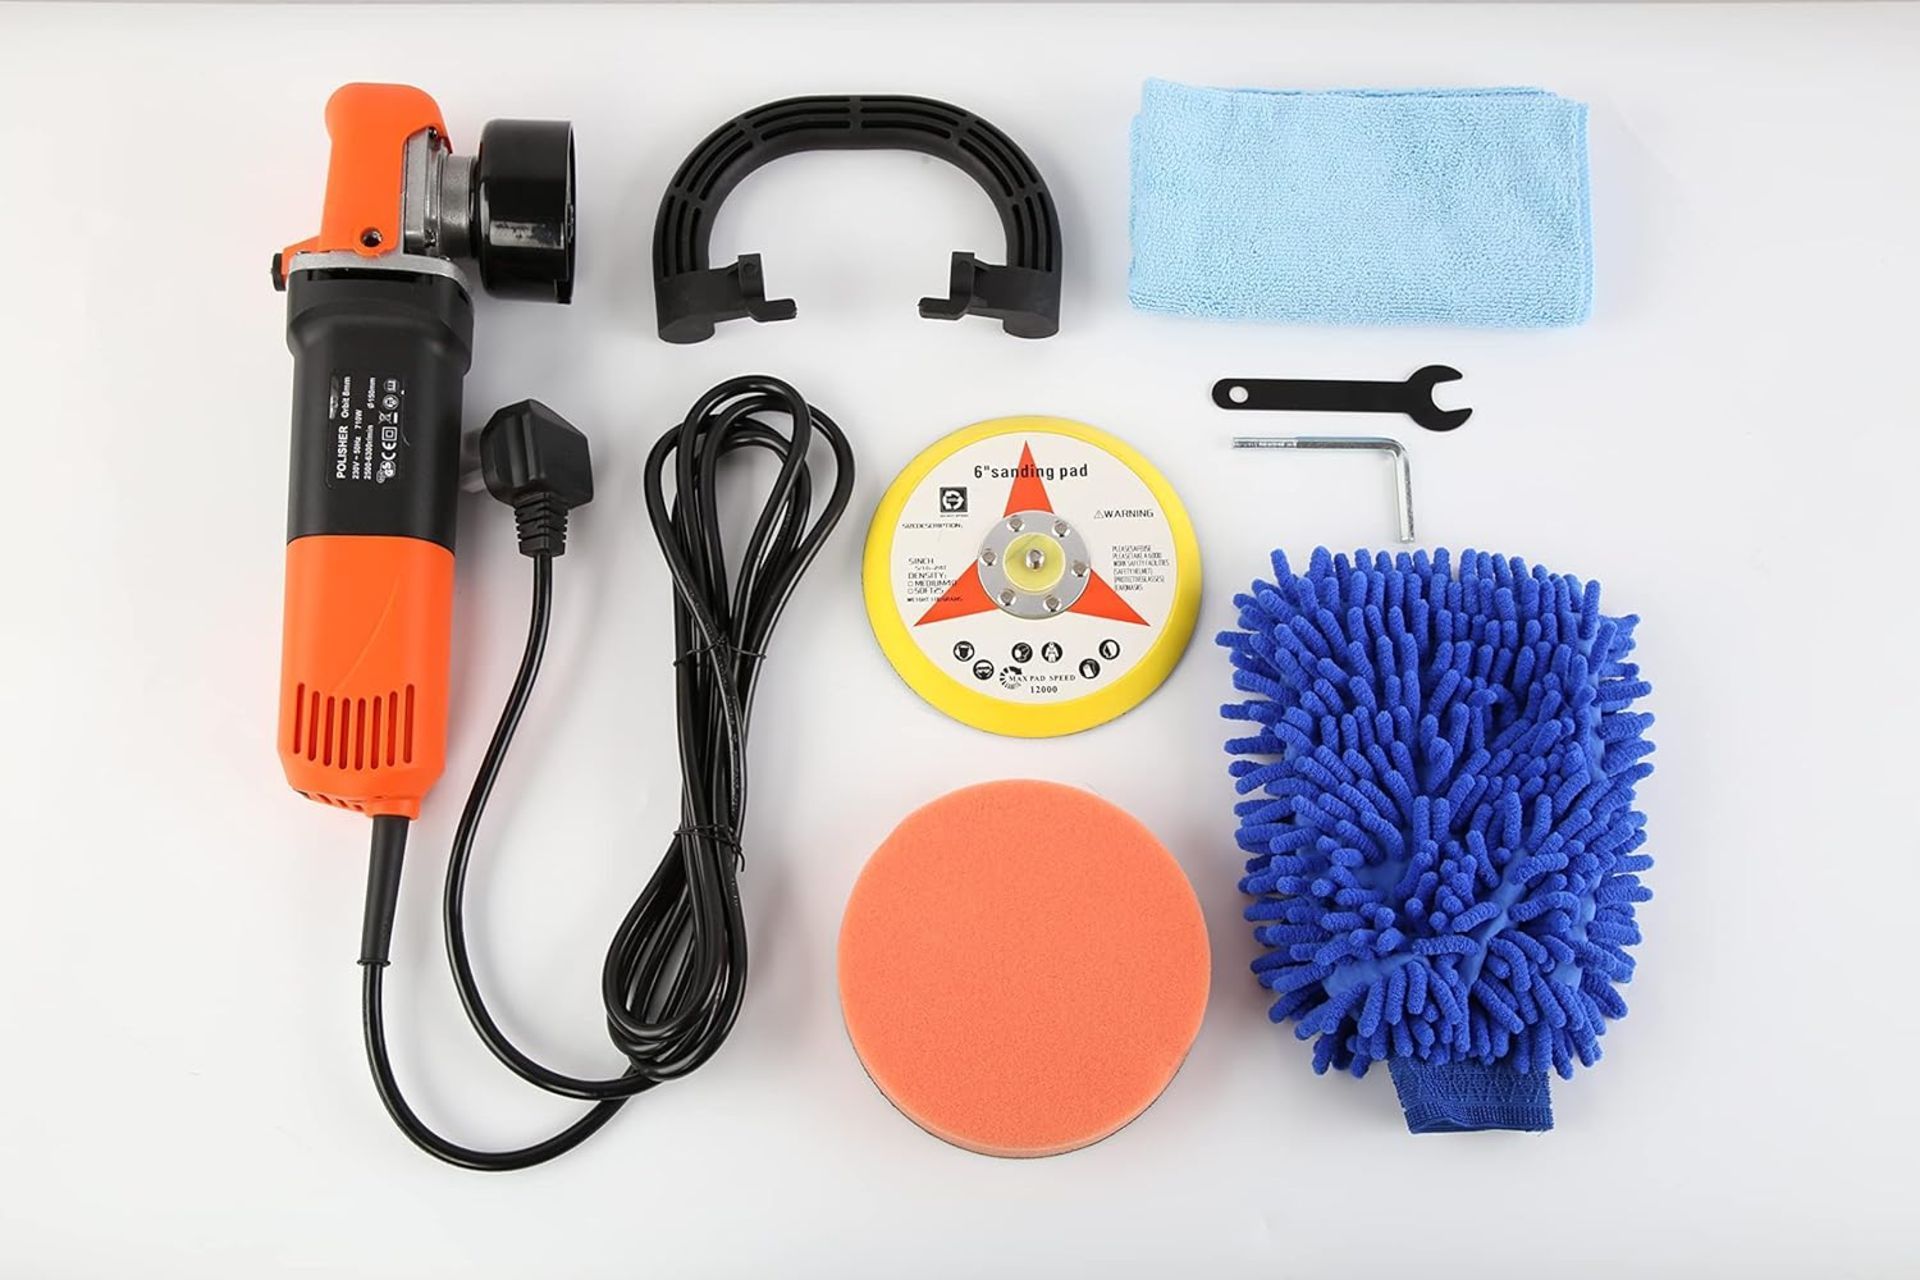 NEW & PACKAGED Powerstorm® Ultra Max Dual Action Car Polisher with 8mm Throw. CAPABLE AND SAFE ON - Bild 2 aus 4